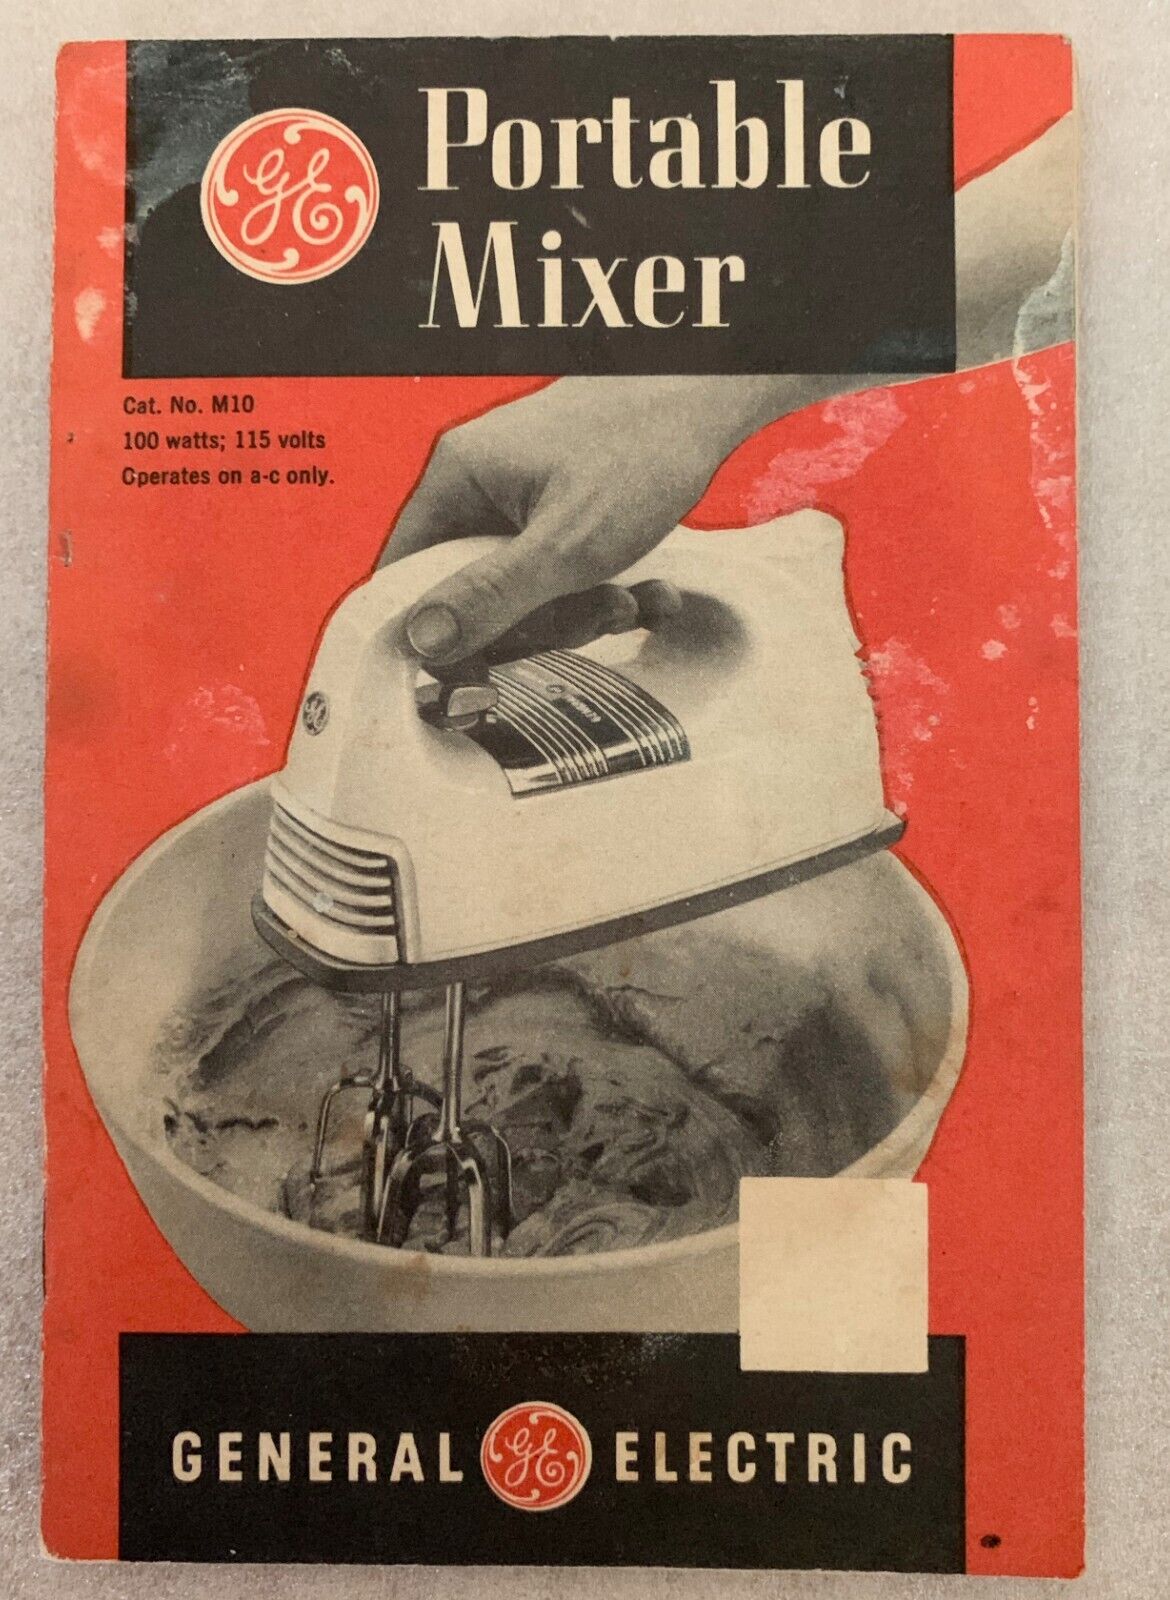 Vintage 1940s General Electric GE Portable Mixer M10 Instruction Booklet Recipes